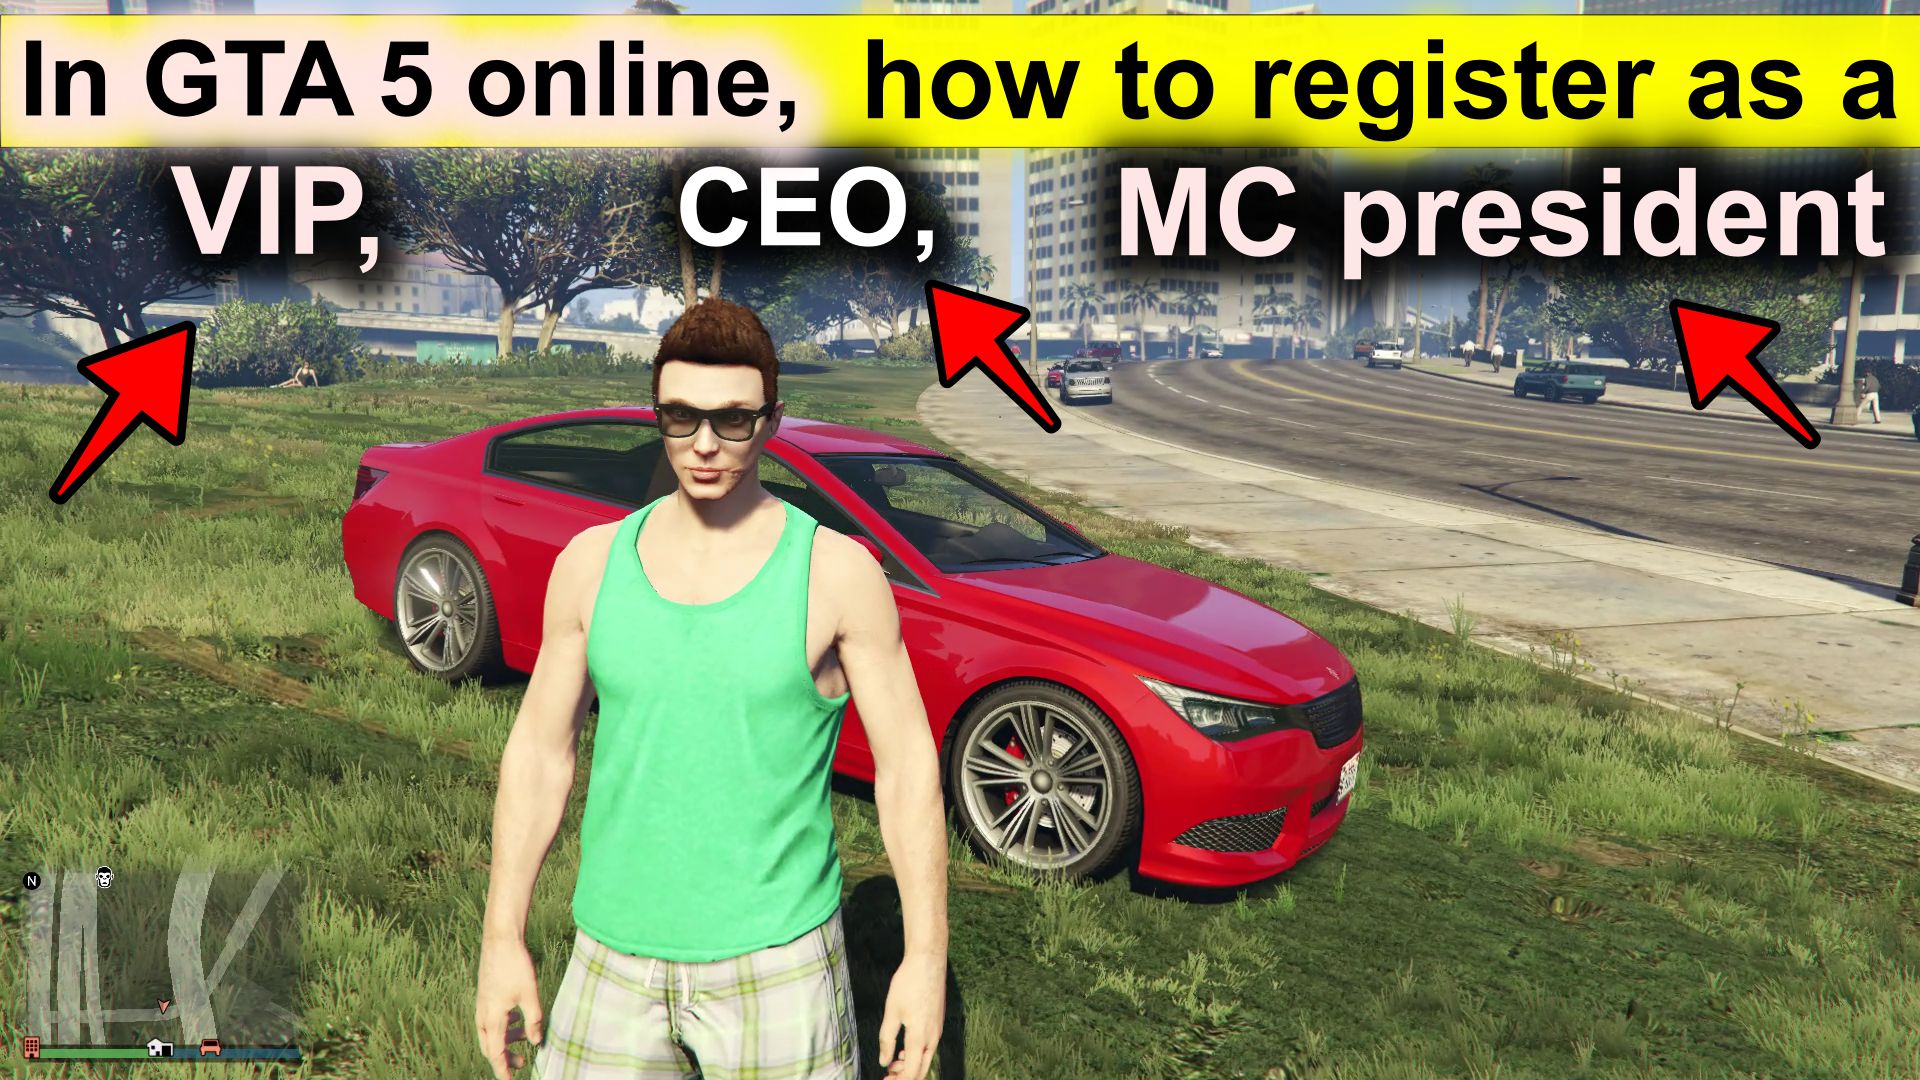 in GTA 5 online,How to register as a VIP or CEO or MC President